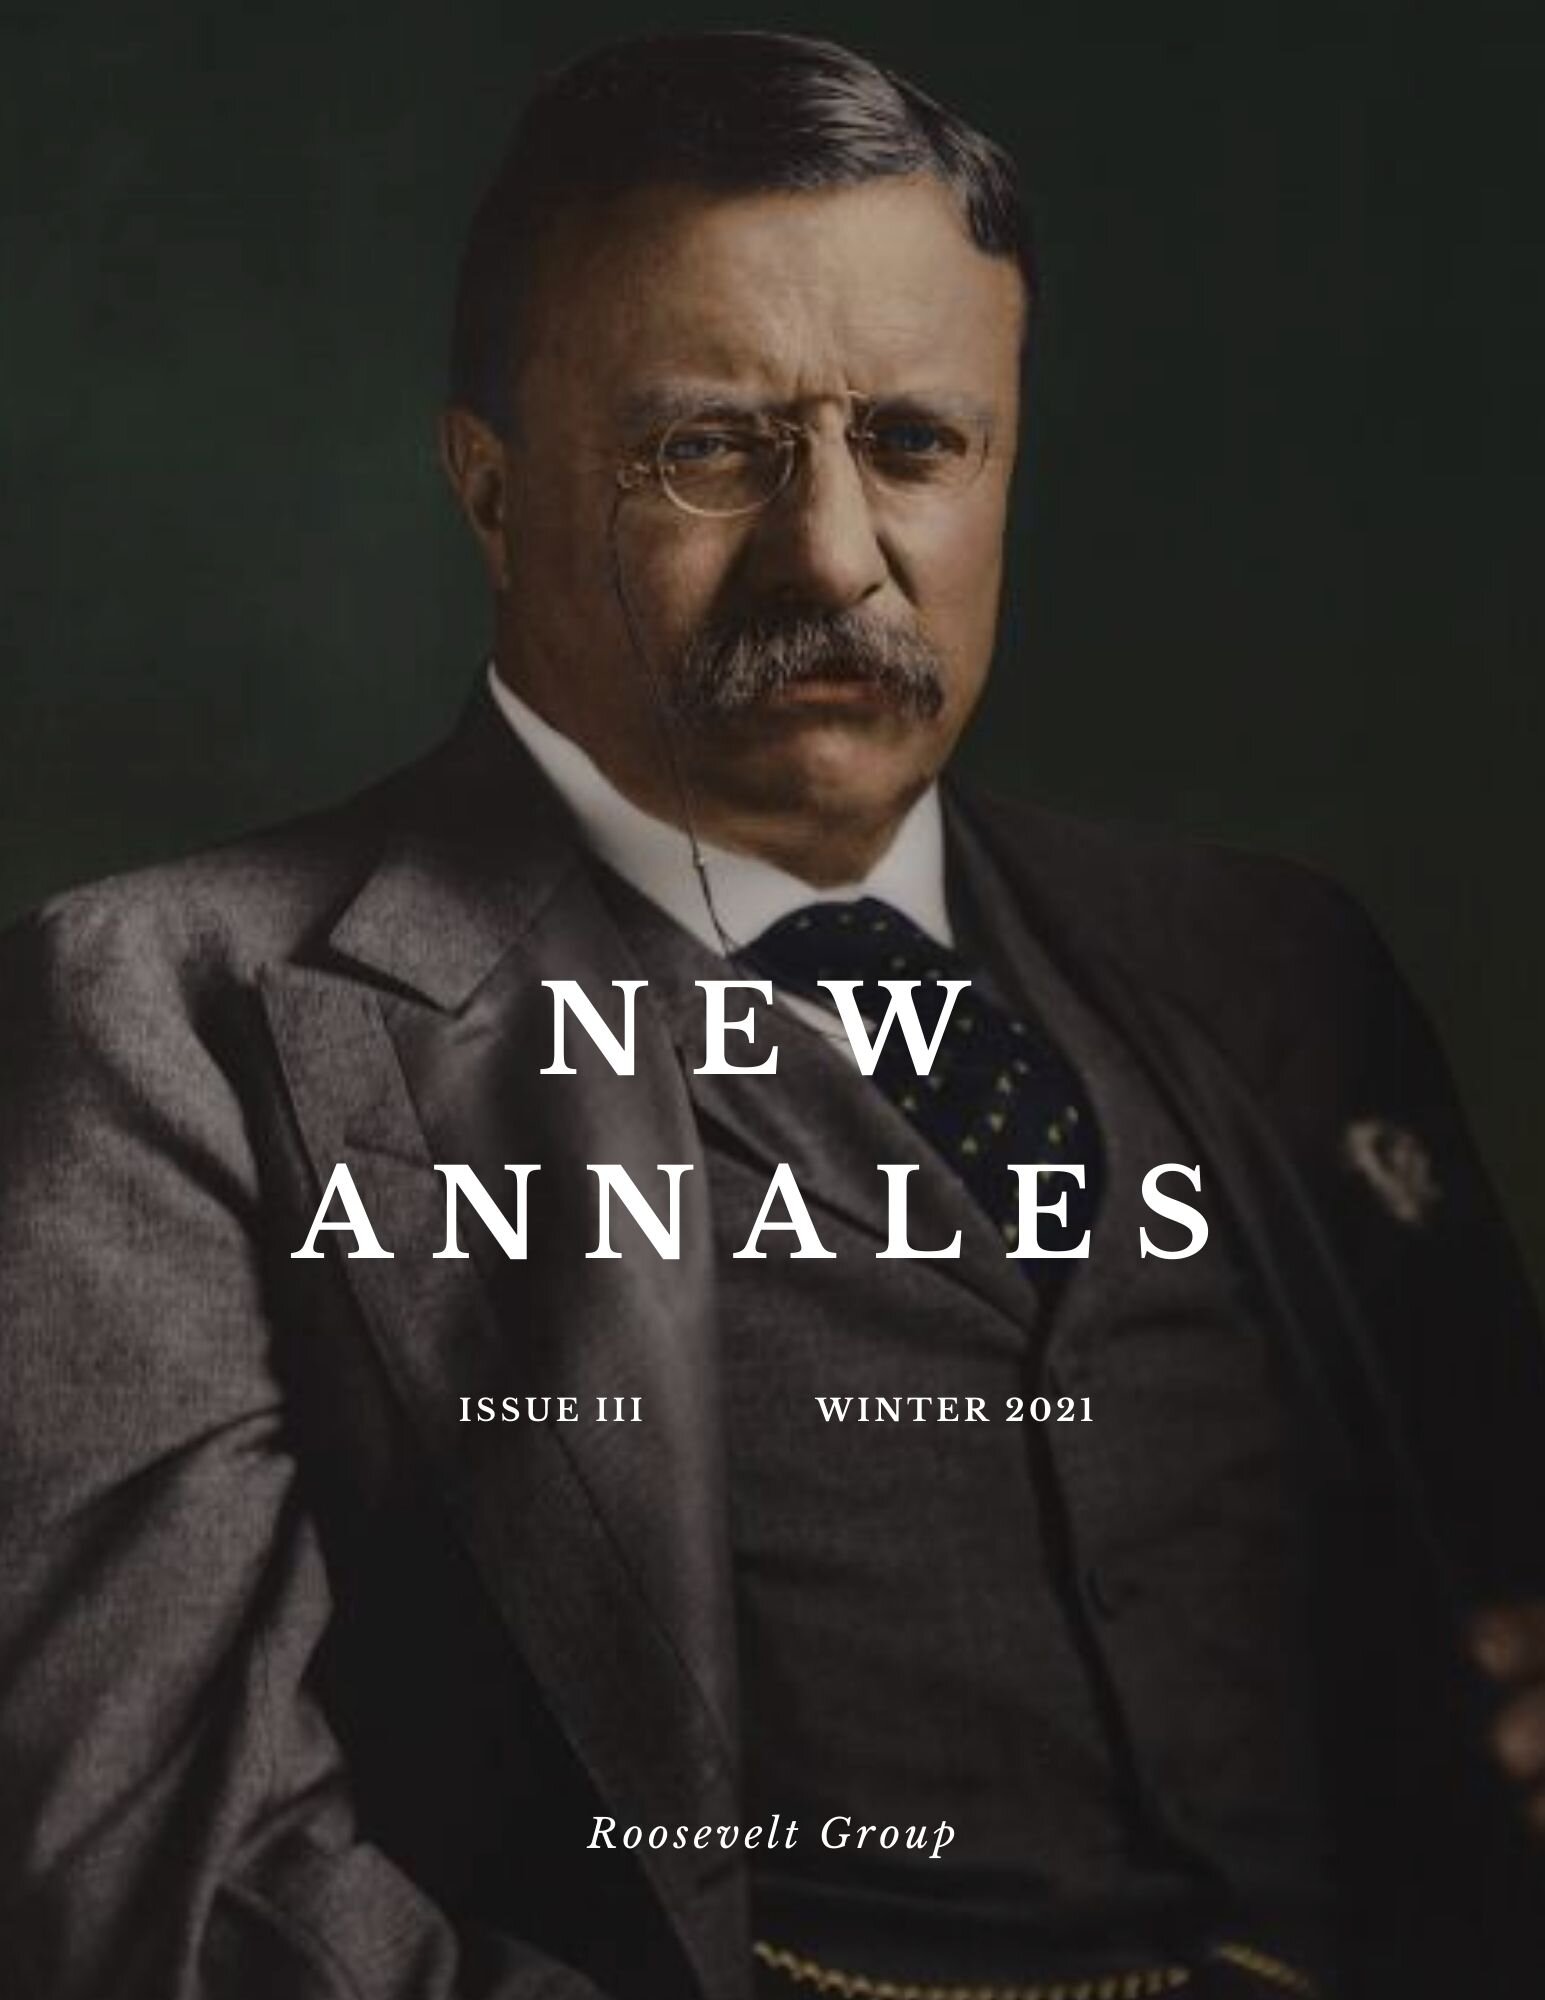 New Annales: Issue III